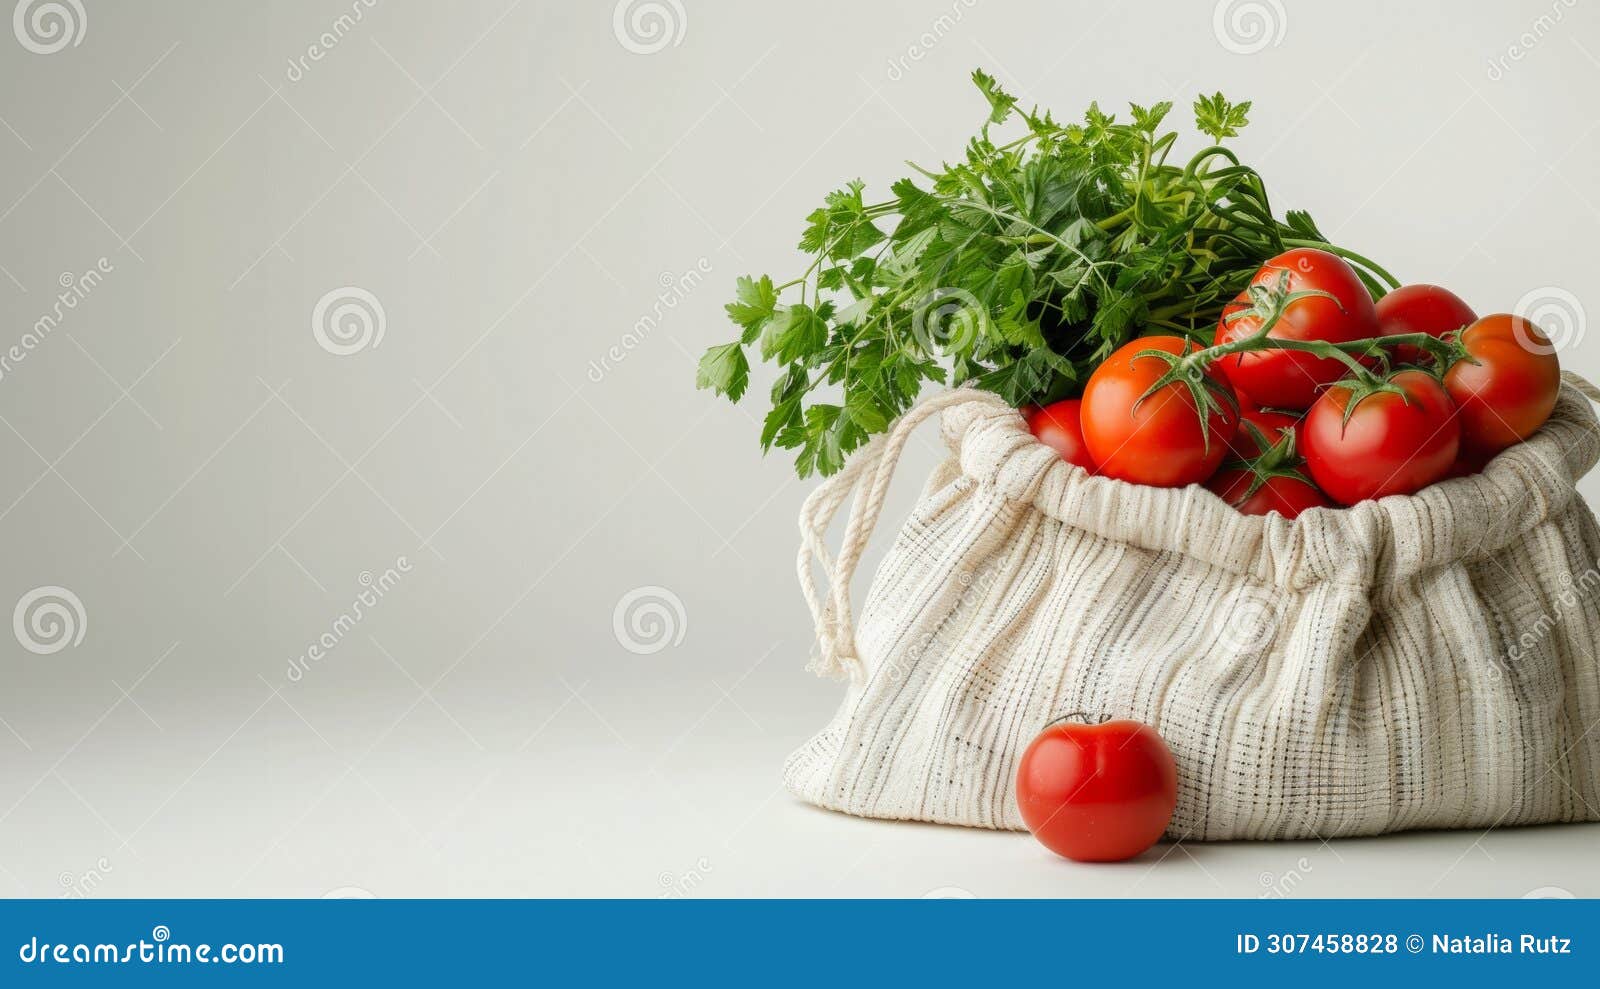 a string bag brims with nature& x27;s tomate